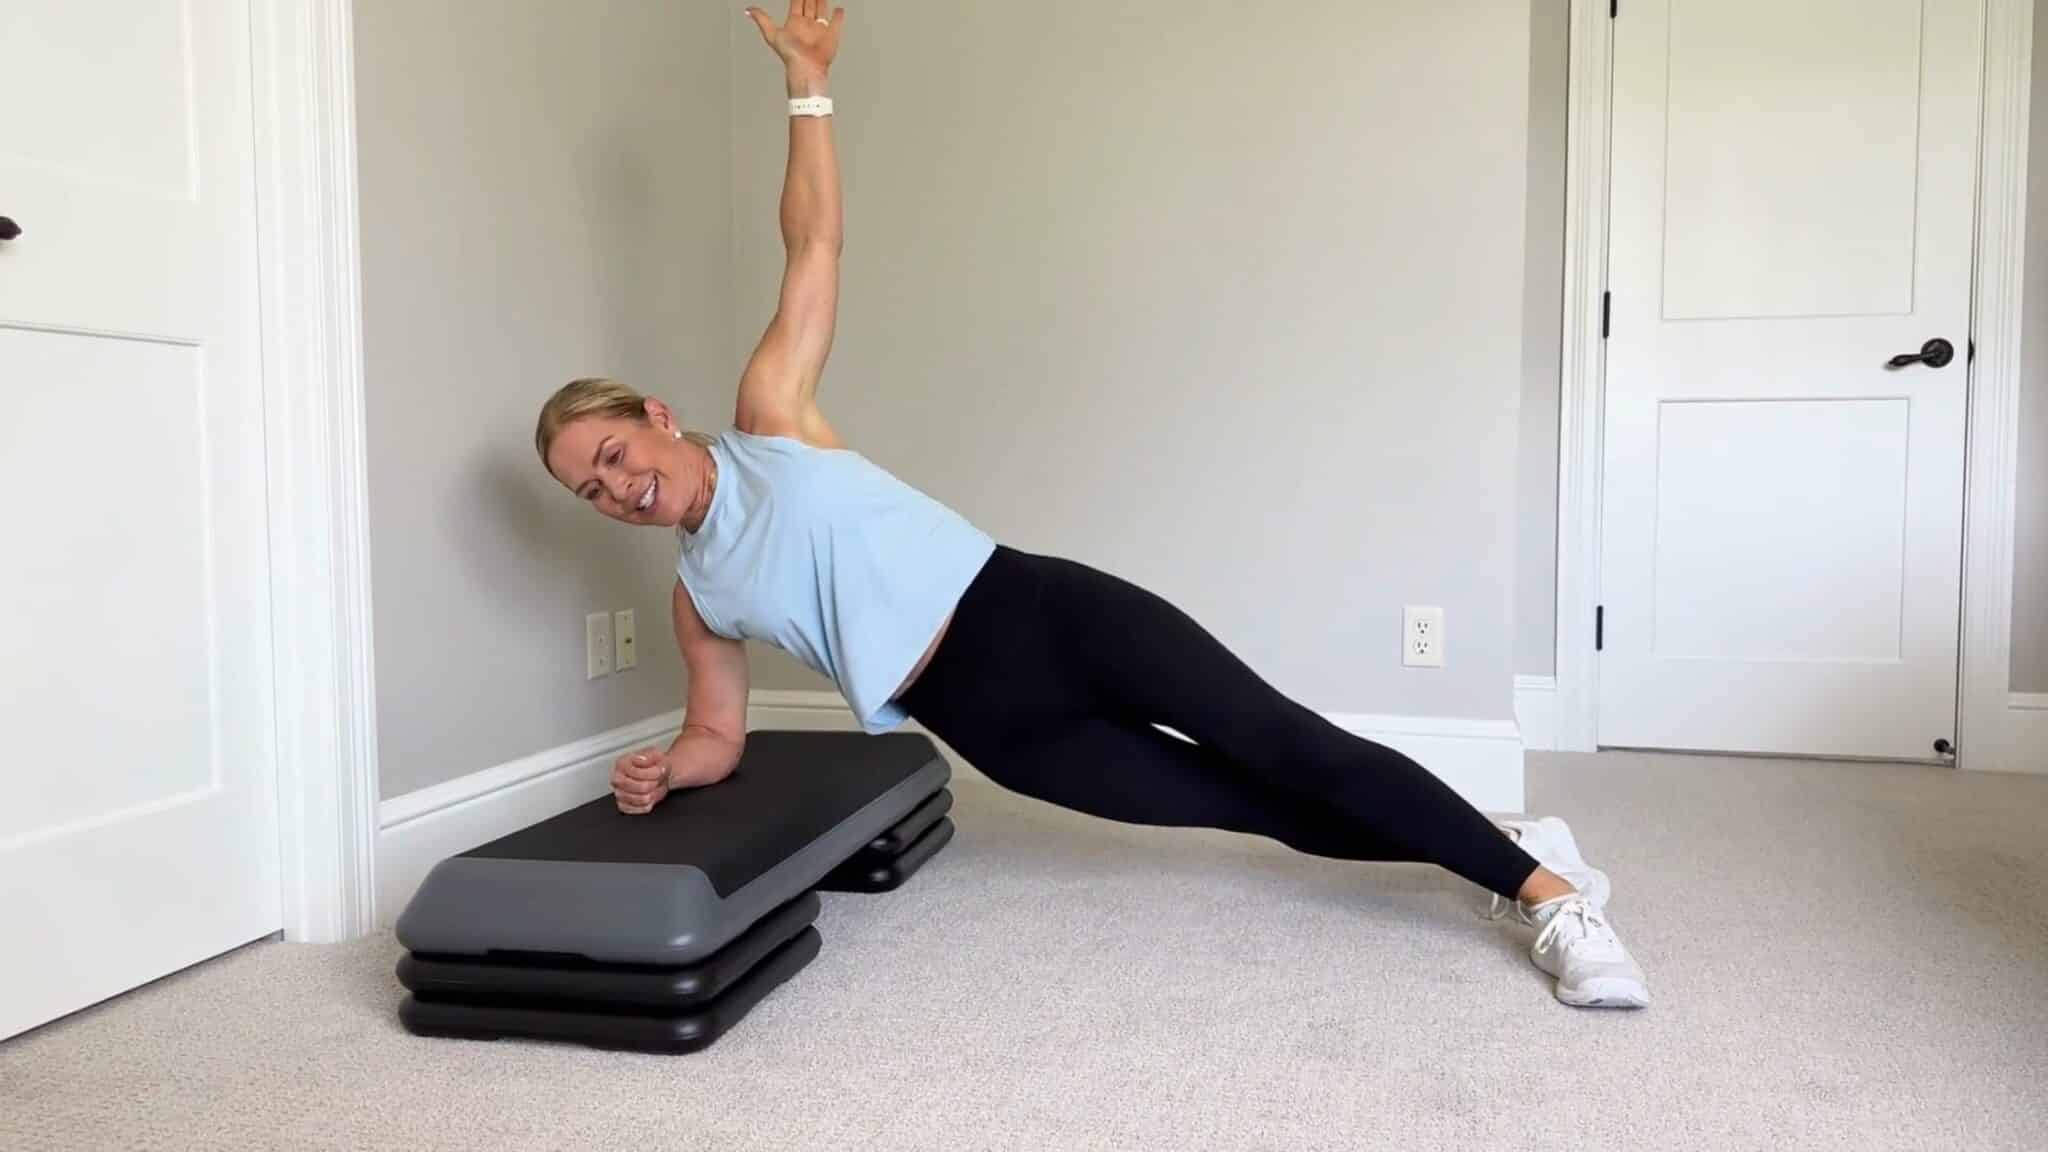 33 Best Step Exercises To Use In Your Home Workout